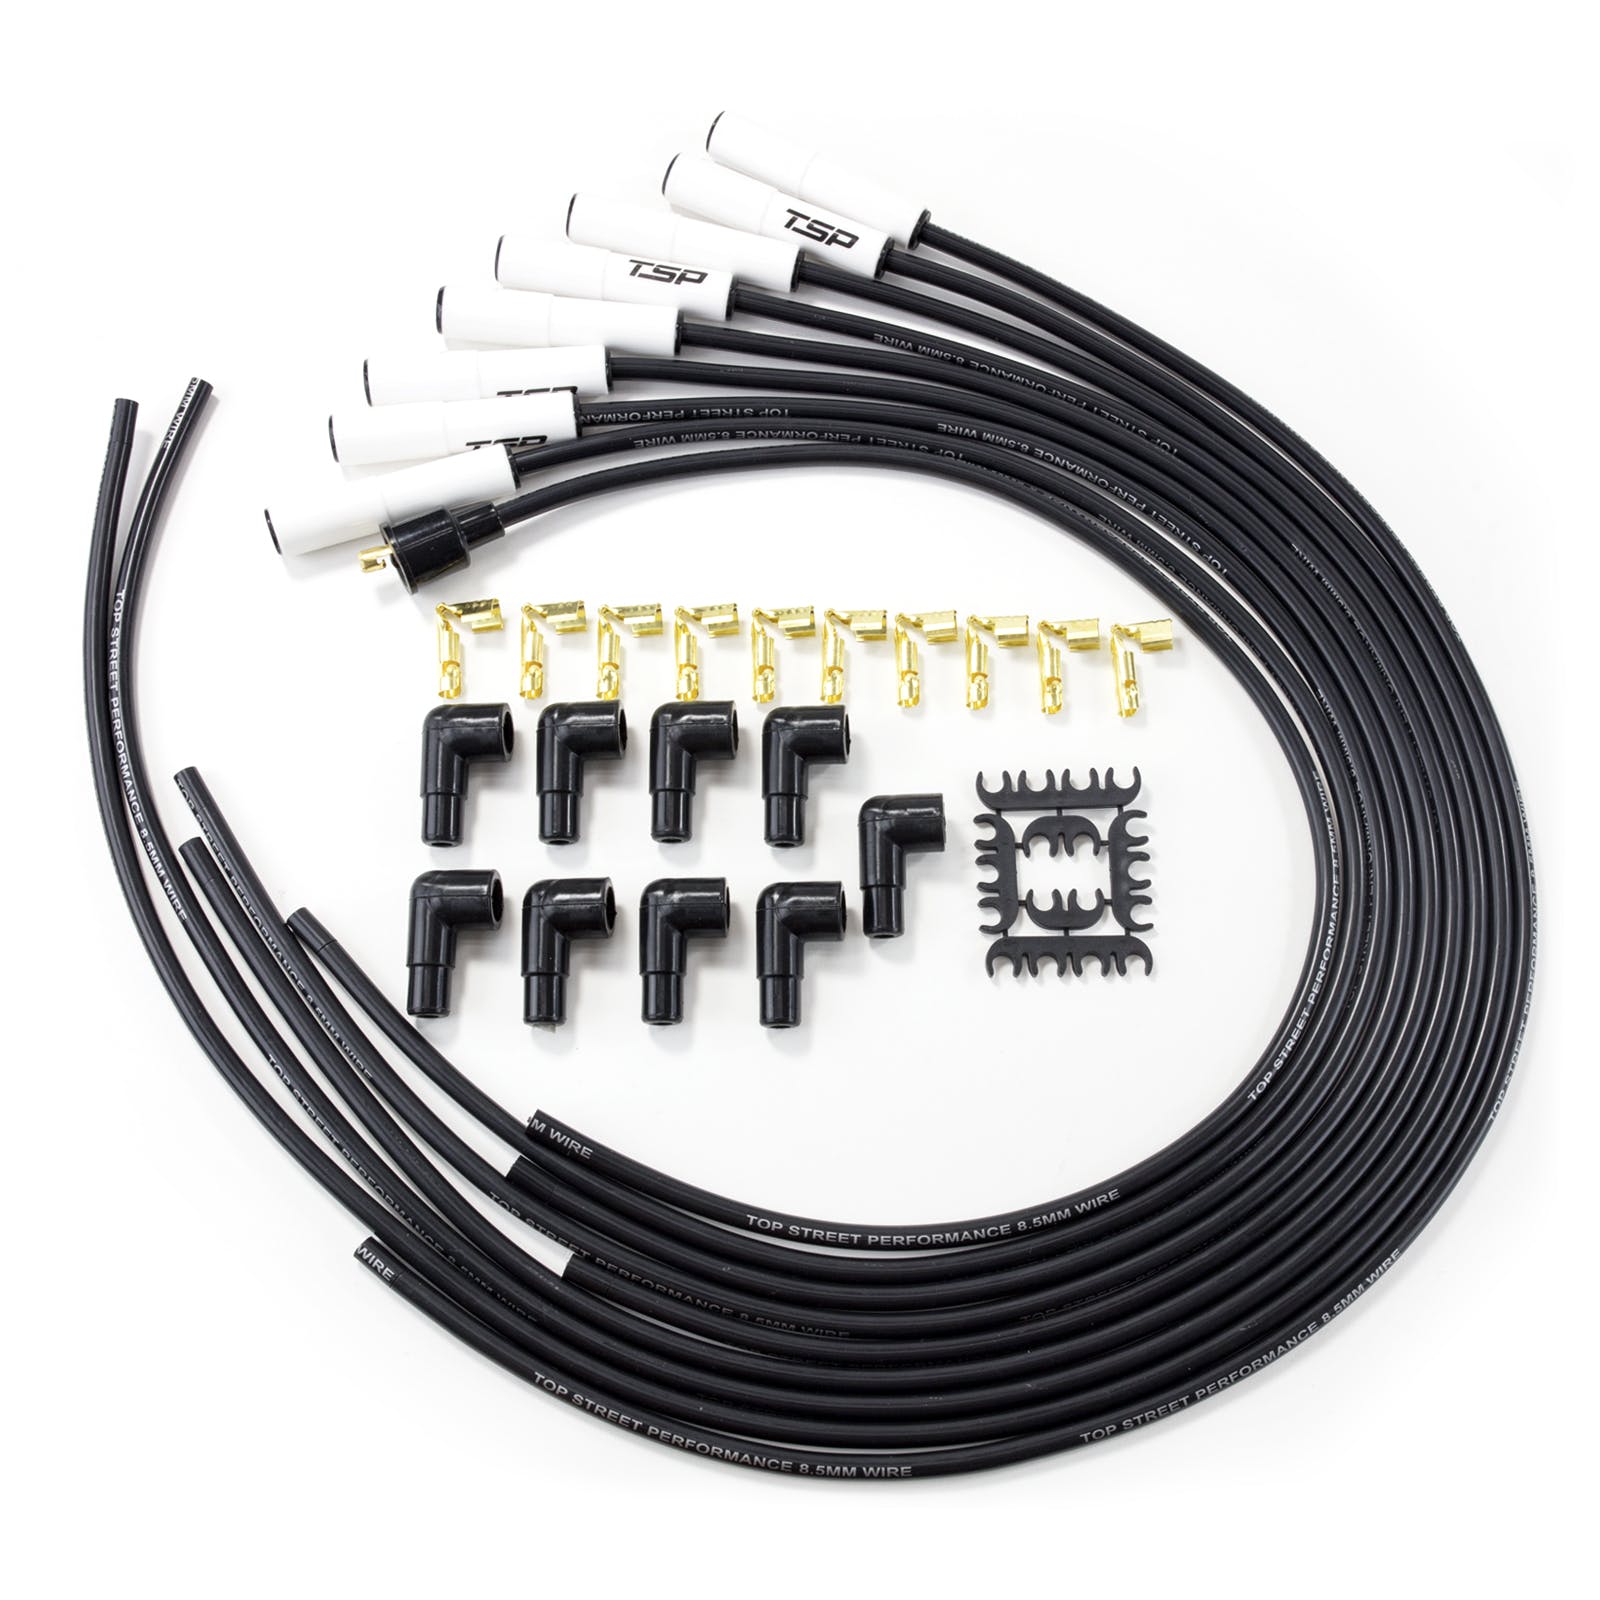 Top Street Performance 85080CE 8.5mm Universal Spark Plug Wire Set with 180° Ceramic Plug Boots, Black Wire